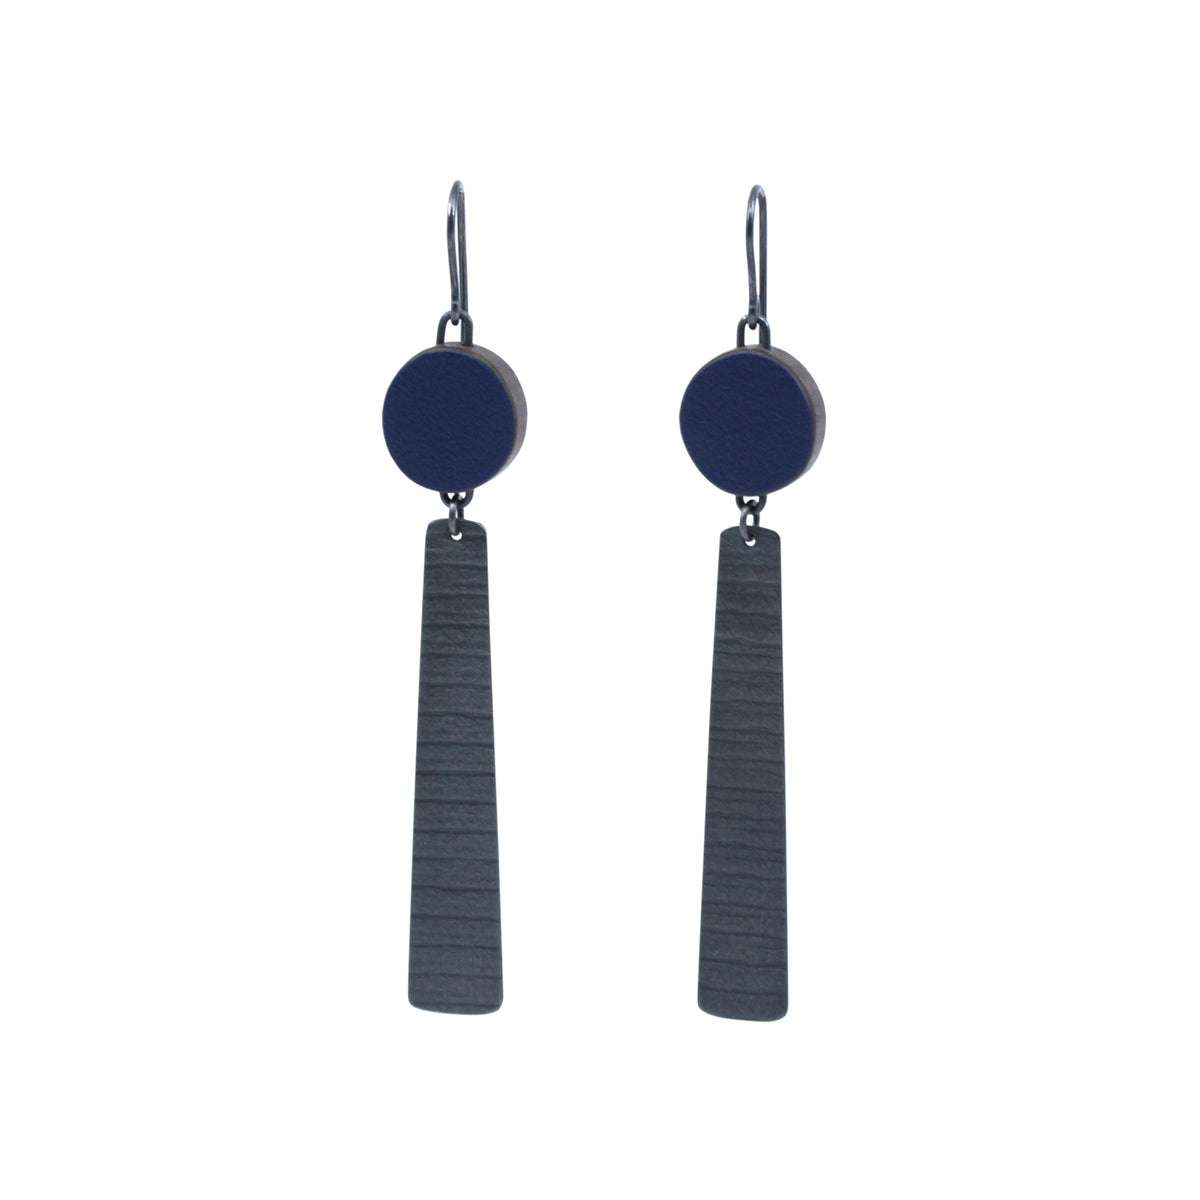 Circle and long stripe earrings - oxidised silver